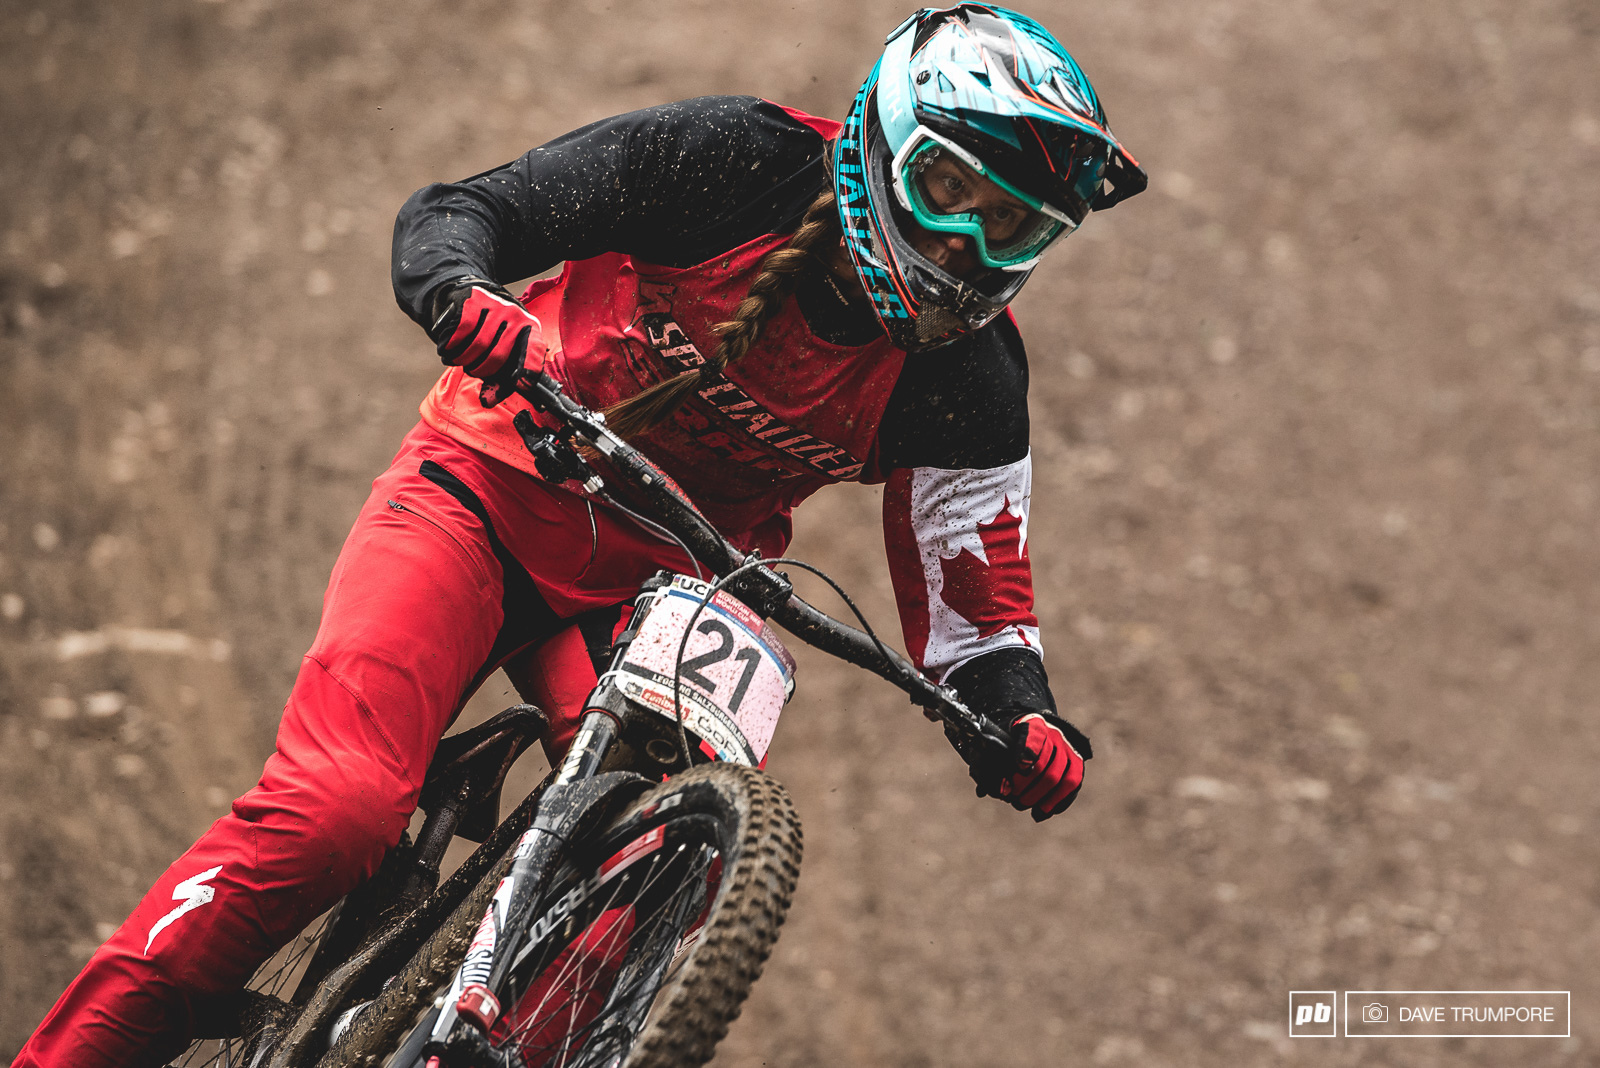 We s love to see Miranda Miller race more World Cups. Her 3rd place today should hopefully be enough motivation to hit up a few more rounds this year.